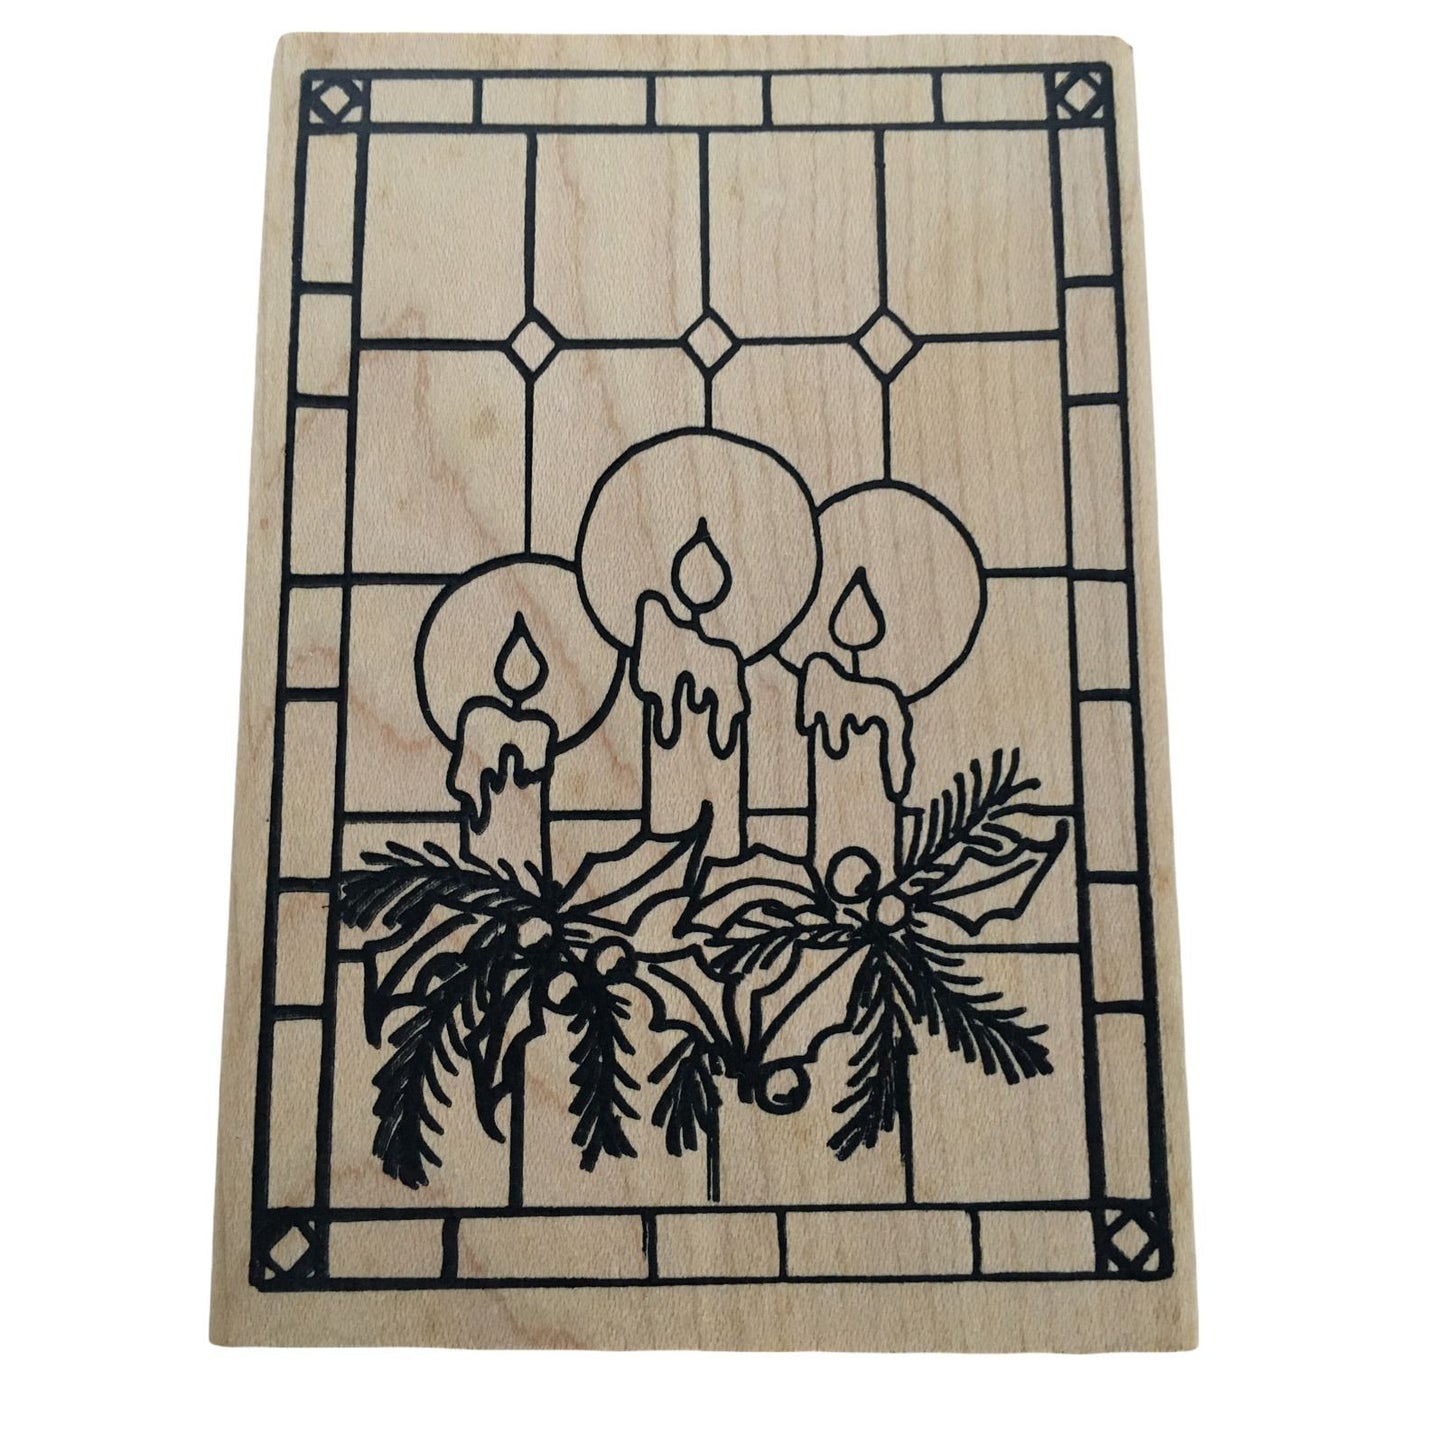 Raindrops on Roses Rubber Stamp Christmas Candles Holly Window Stained Glass